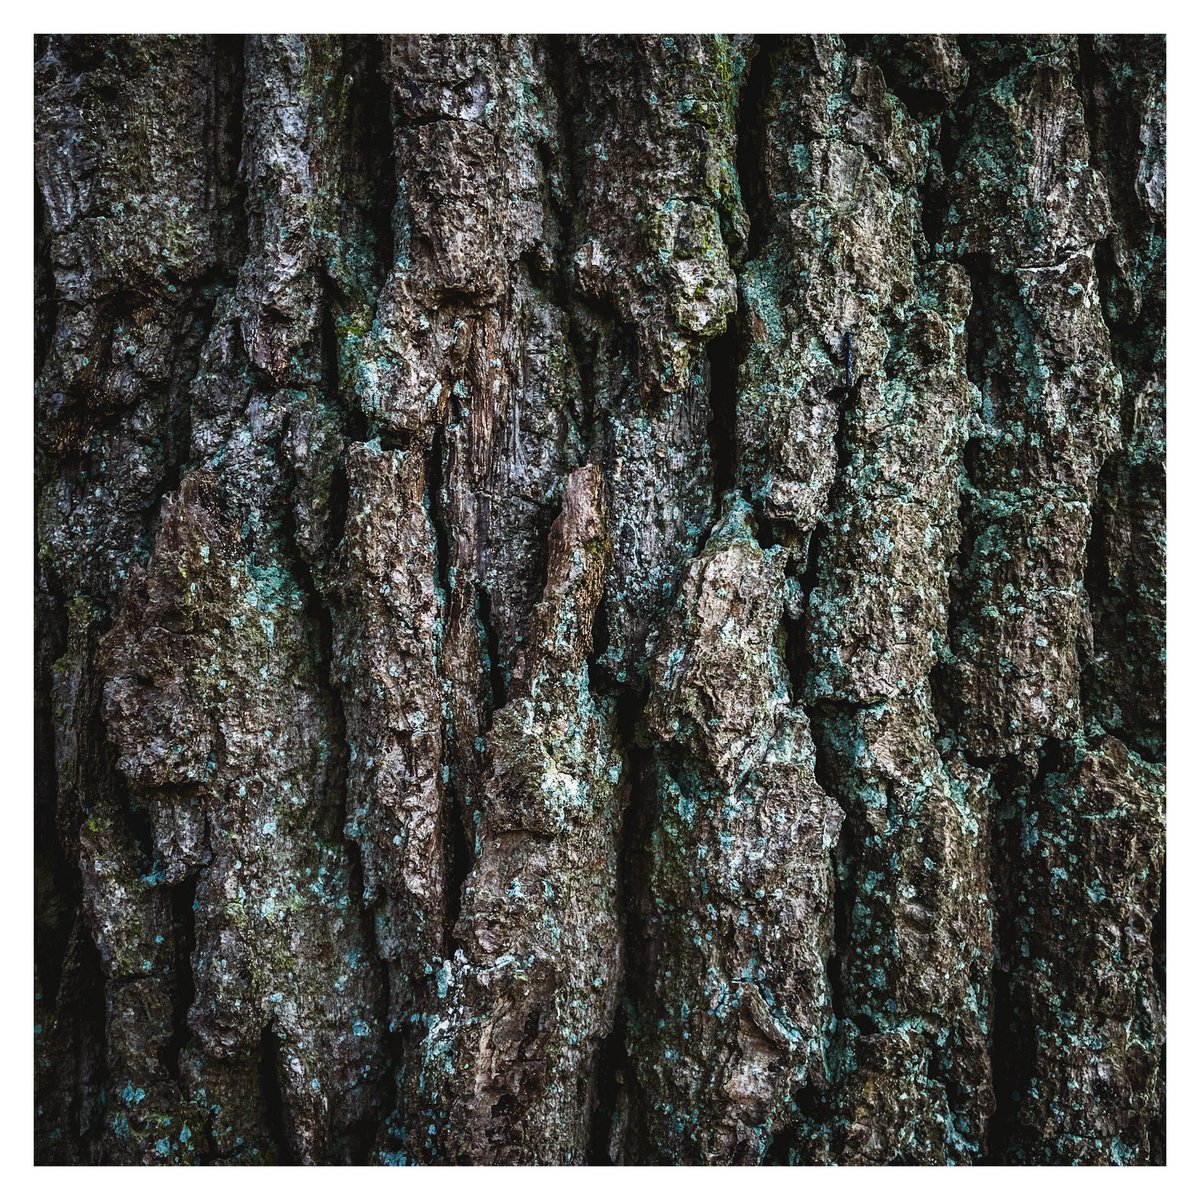 Morning all ☕️ continuing to test shoot in ProRaw format as inspired by @MikeHindle Chose tree bark details (oak) as motif as inspired by @thebatchpatch1 #monochrome & colored version for comparison #bnw_macro #blackandwhitephotography #macrophotography #treephotography